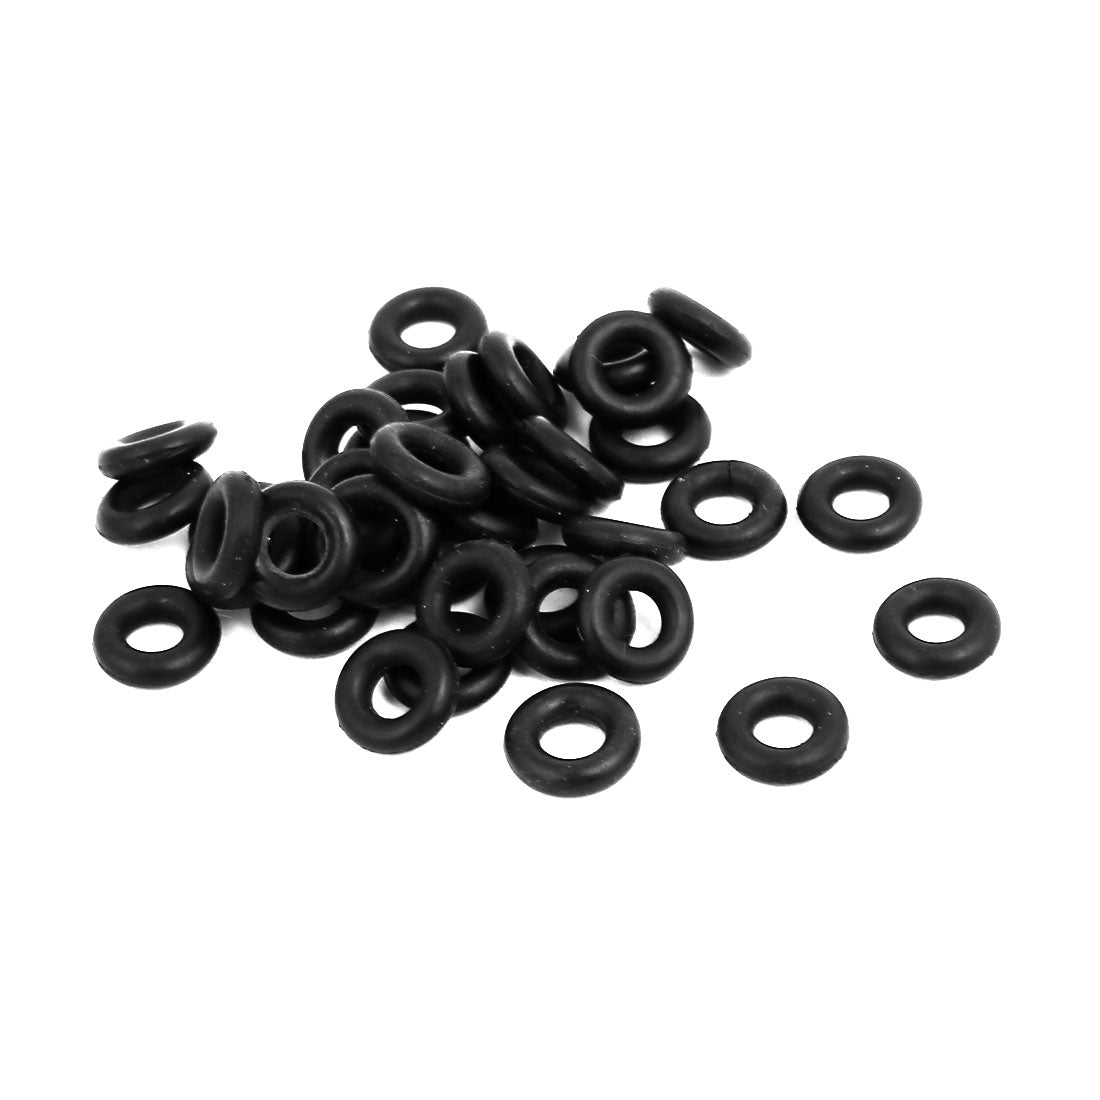 uxcell Uxcell 35 Pcs Black 7mm x 2mm Oil Resistant Sealing Ring O-shape Grommets